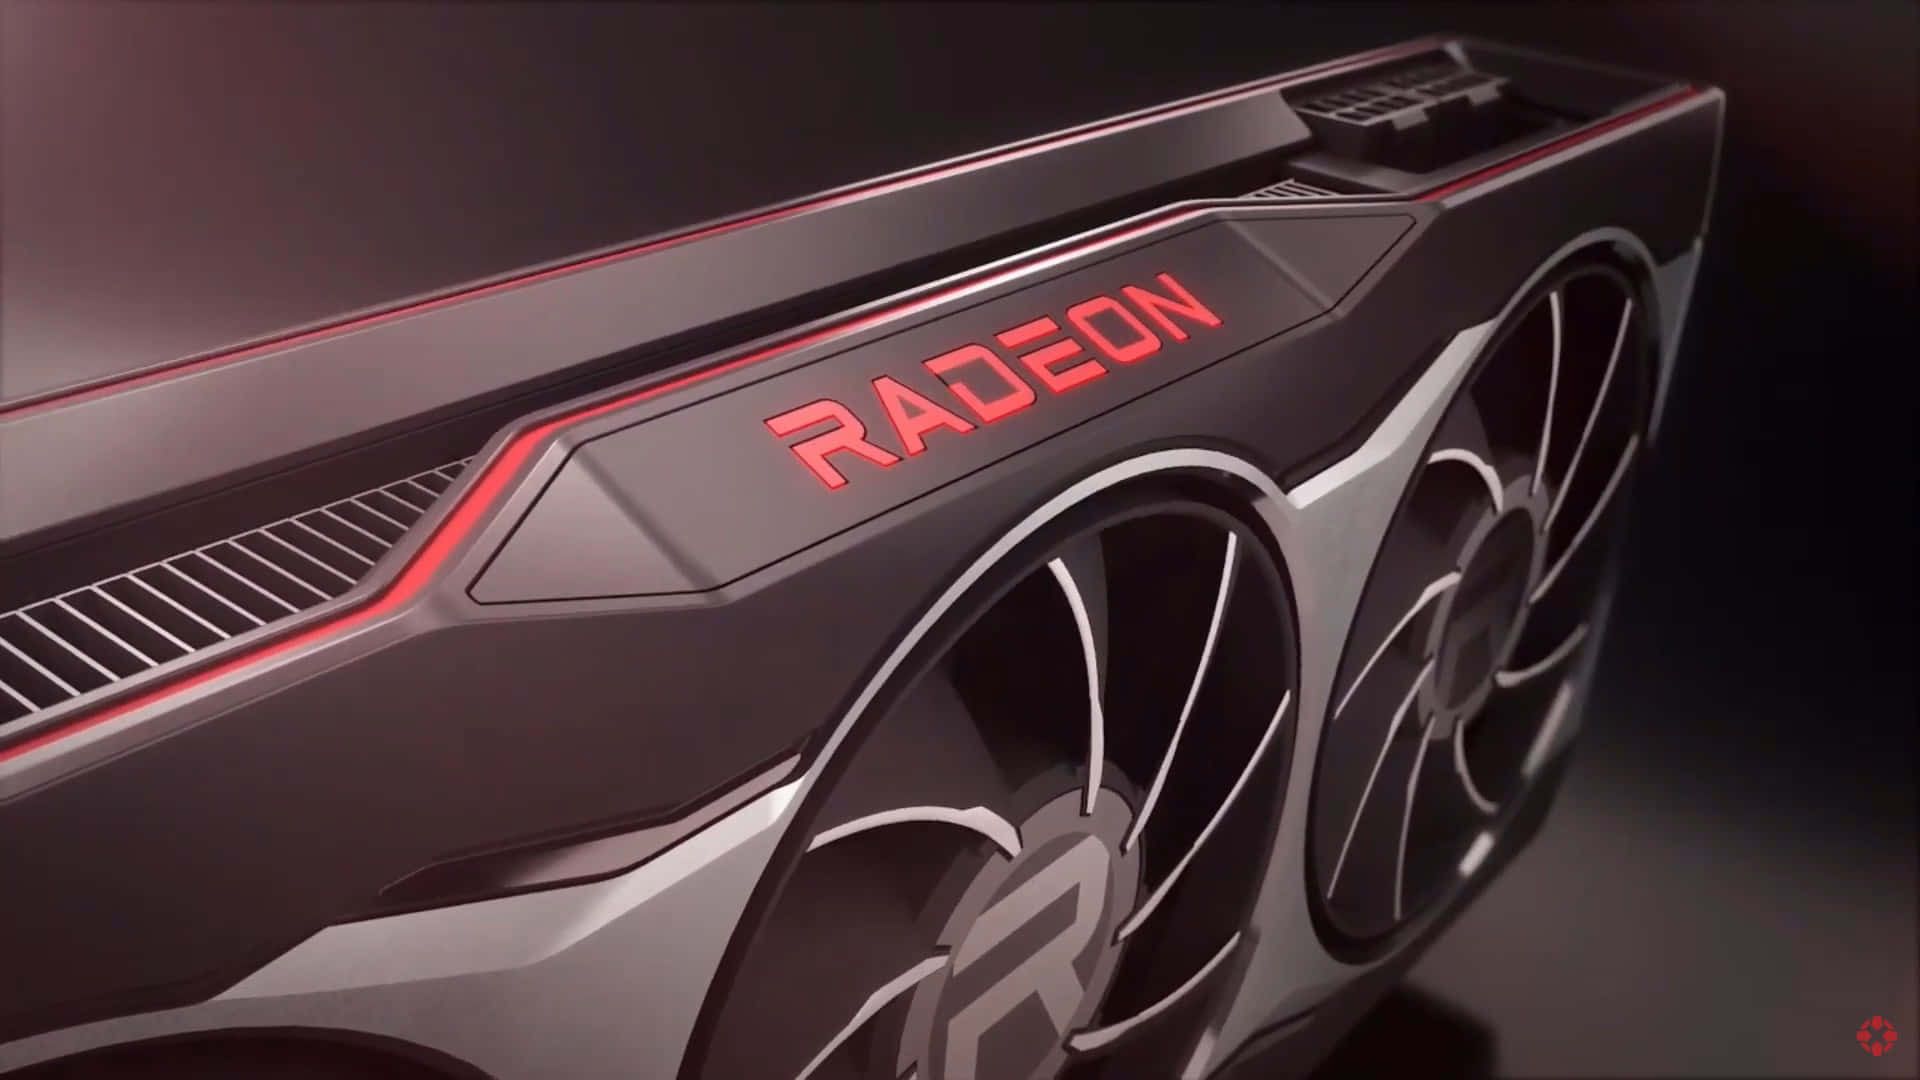 Get the most out of your gaming experience with Radeon Wallpaper